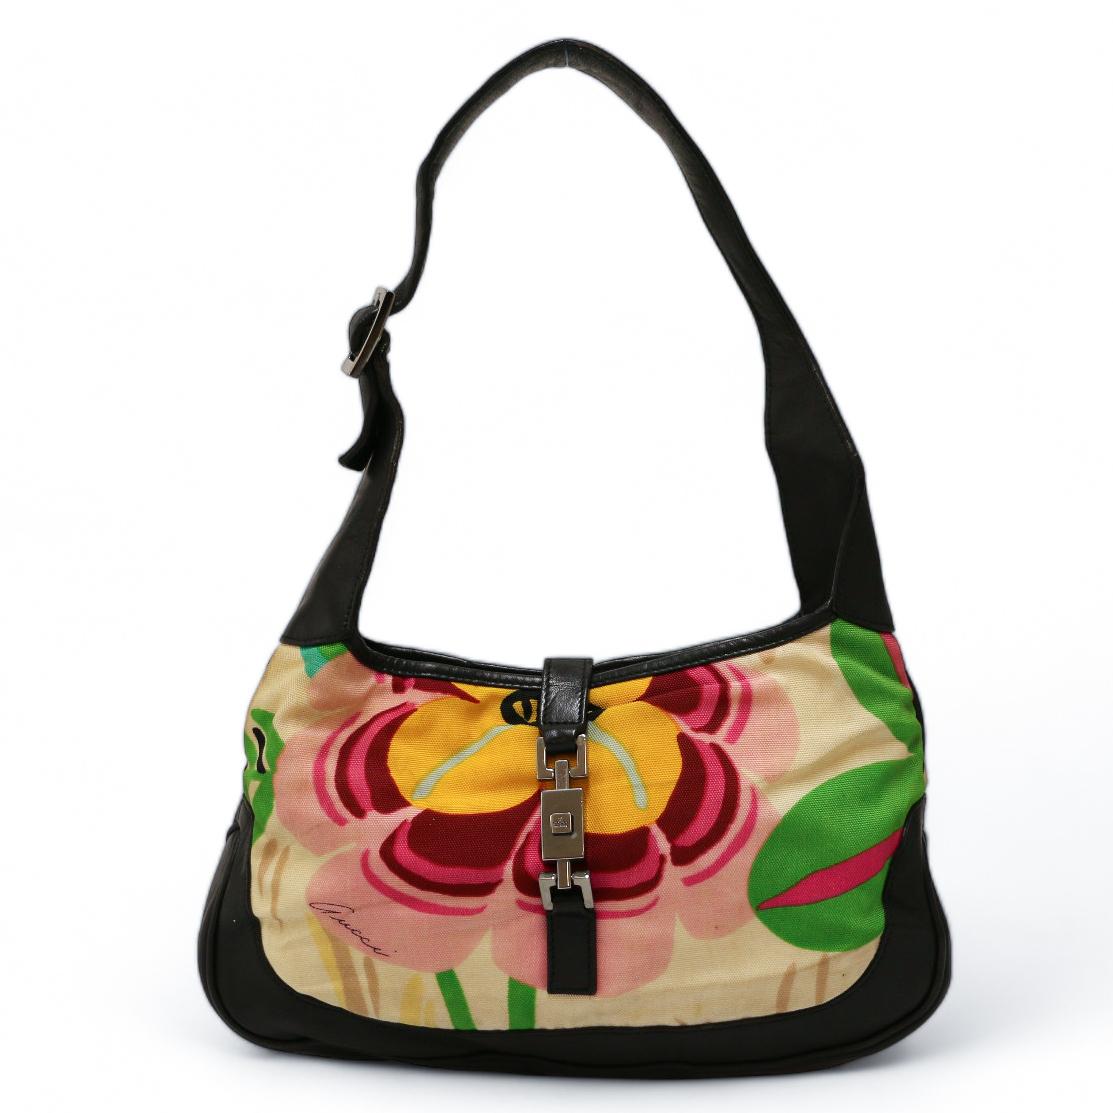 Beautiful collector mini Jackie by GUCCI with floral print
Condition: very good
Made in Italy
Collection : Mini Jackie
Gender: women
Material: canvas, leather
Interior: monogrammed black textile
Color: black, multicolor
Dimensions: 27 x 17 x 4